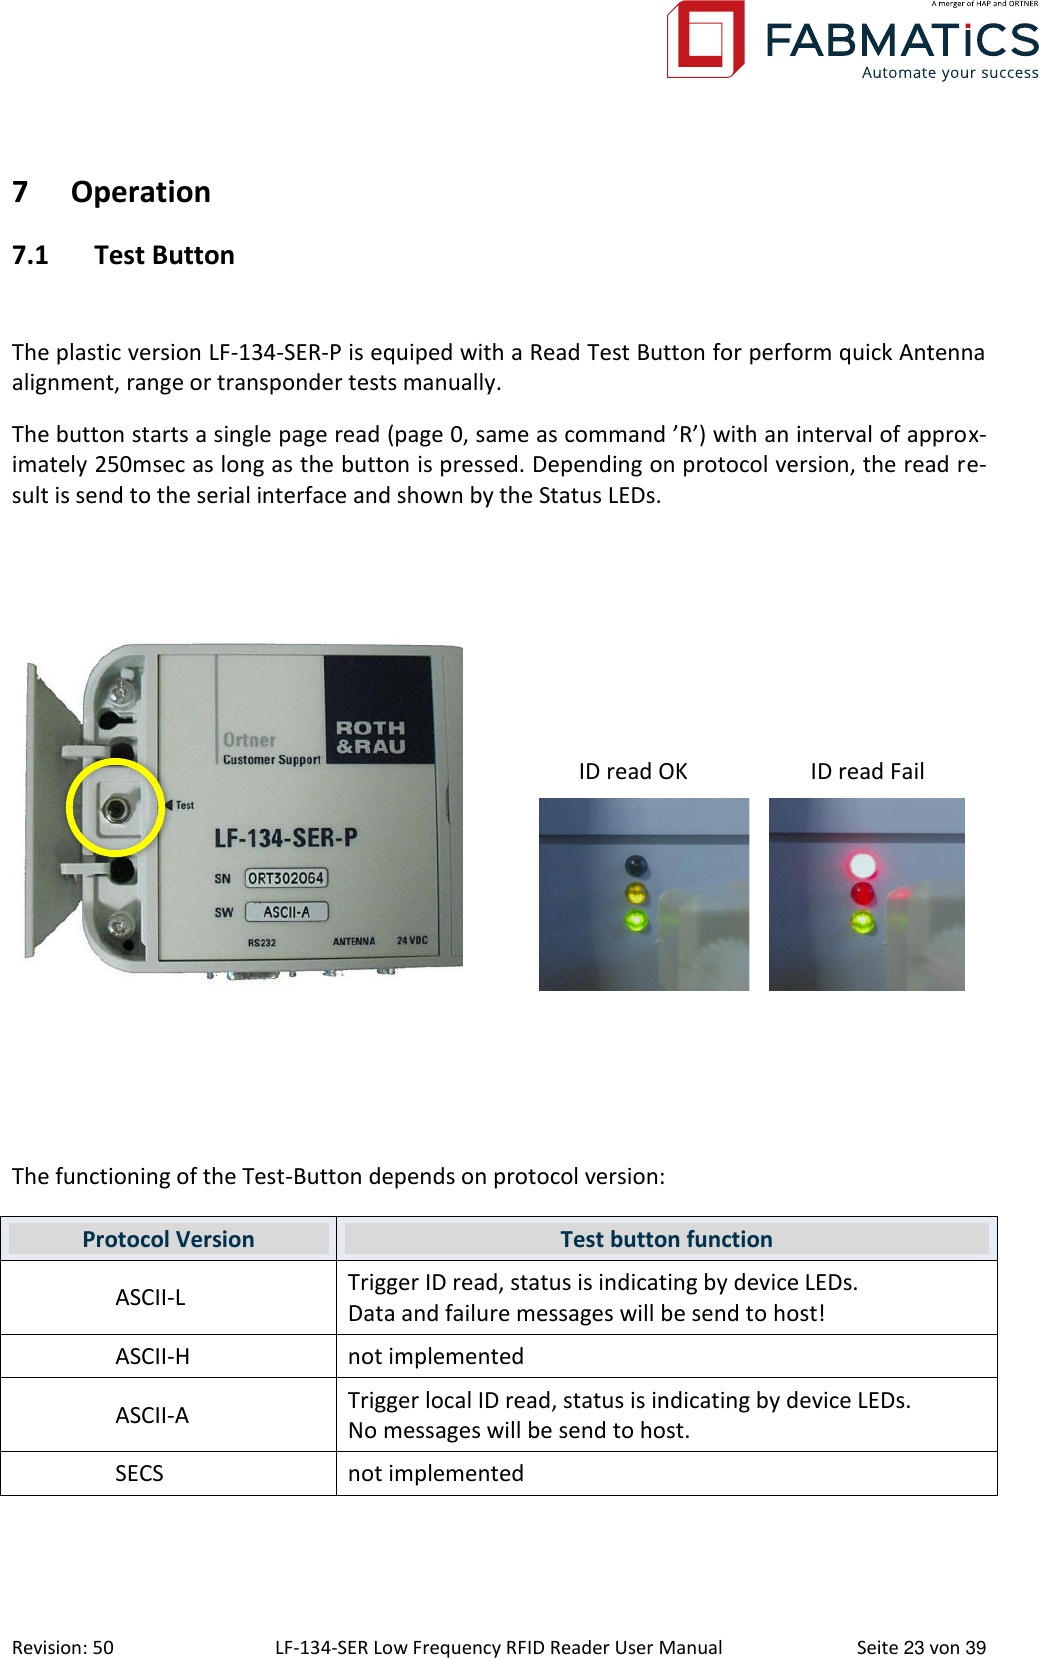  Revision: 50 LF-134-SER Low Frequency RFID Reader User Manual  Seite 23 von 39 7 Operation 7.1 Test Button  The plastic version LF-134-SER-P is equiped with a Read Test Button for perform quick Antenna alignment, range or transponder tests manually.  The button starts a single page read (page 0, same as command ’R’) with an interval of approx-imately 250msec as long as the button is pressed. Depending on protocol version, the read re-sult is send to the serial interface and shown by the Status LEDs.        ID read OK  ID read Fail     The functioning of the Test-Button depends on protocol version: Protocol Version Test button function ASCII-L Trigger ID read, status is indicating by device LEDs. Data and failure messages will be send to host! ASCII-H not implemented ASCII-A Trigger local ID read, status is indicating by device LEDs. No messages will be send to host. SECS not implemented  